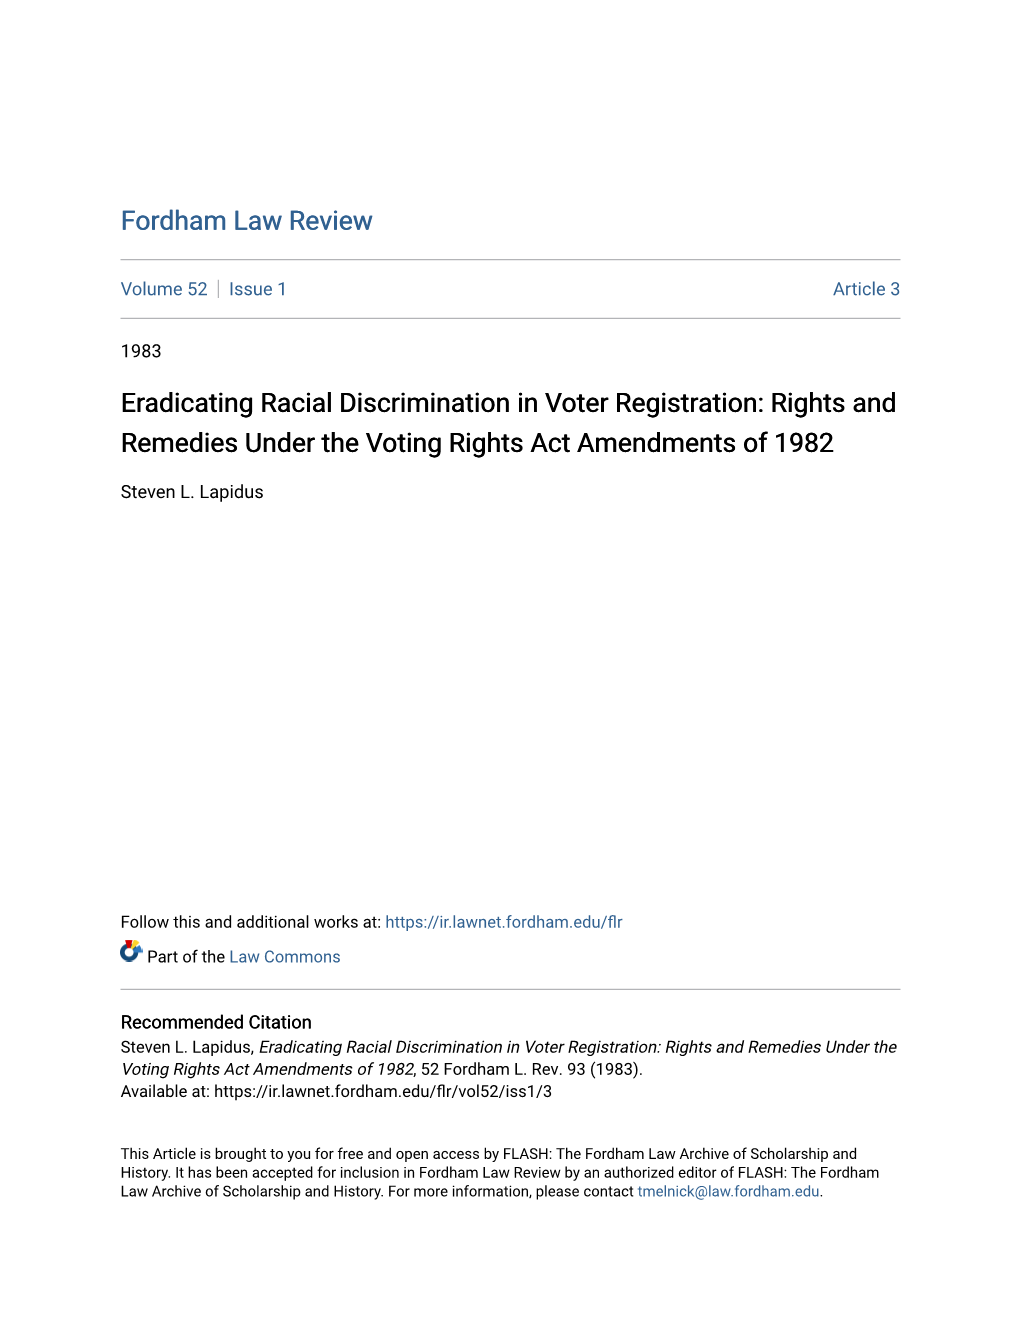 Eradicating Racial Discrimination in Voter Registration: Rights and Remedies Under the Voting Rights Act Amendments of 1982